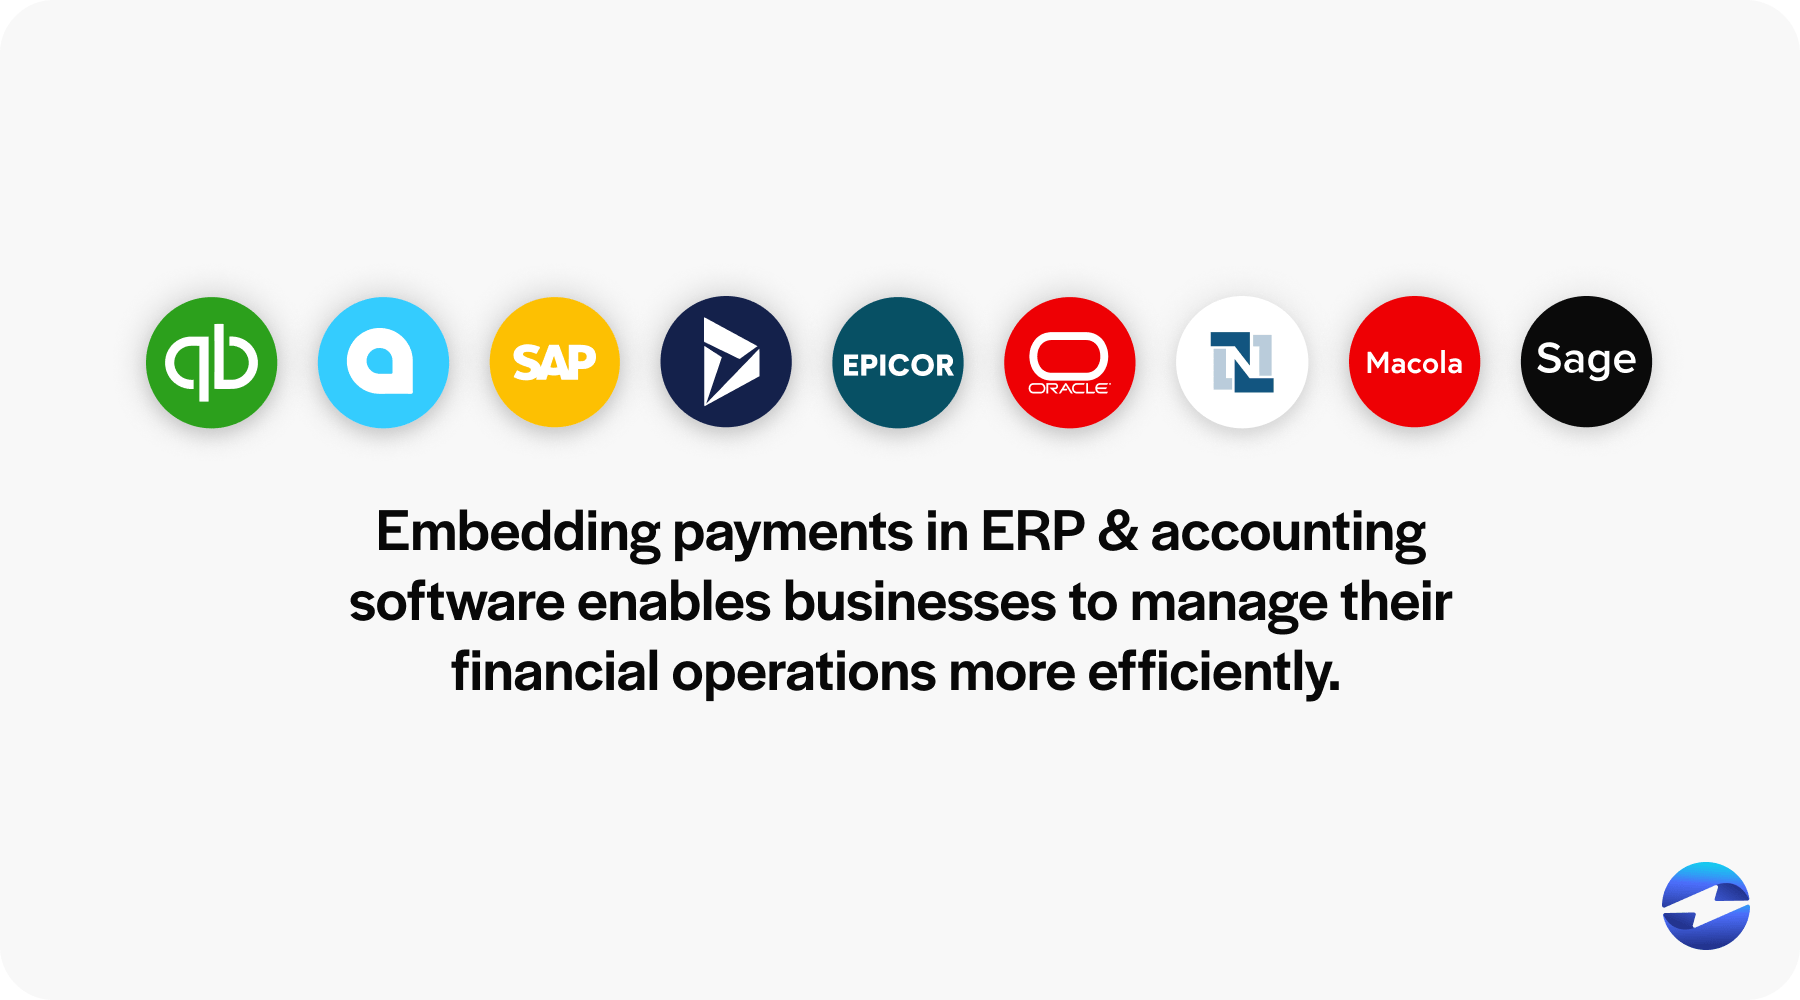 Embedding payments in ERP and accounting software